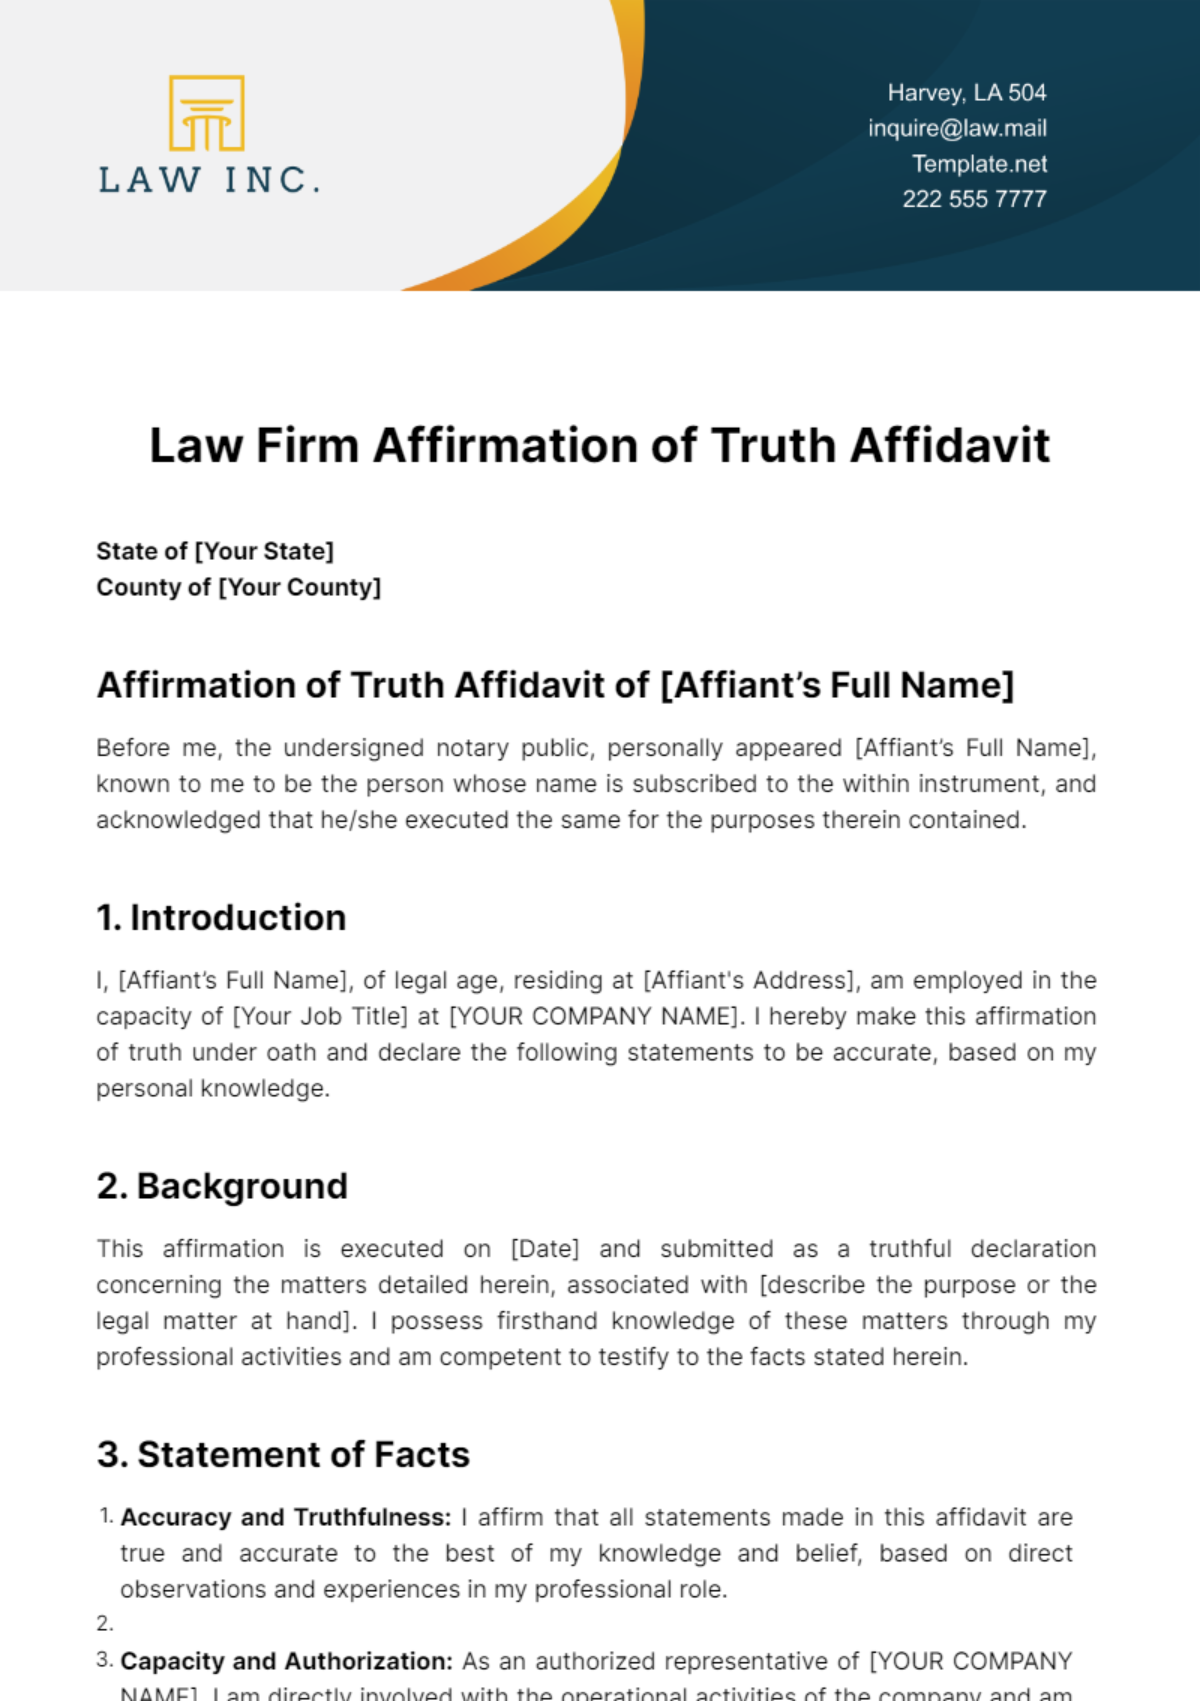 Law Firm Affirmation of Truth Affidavit Template